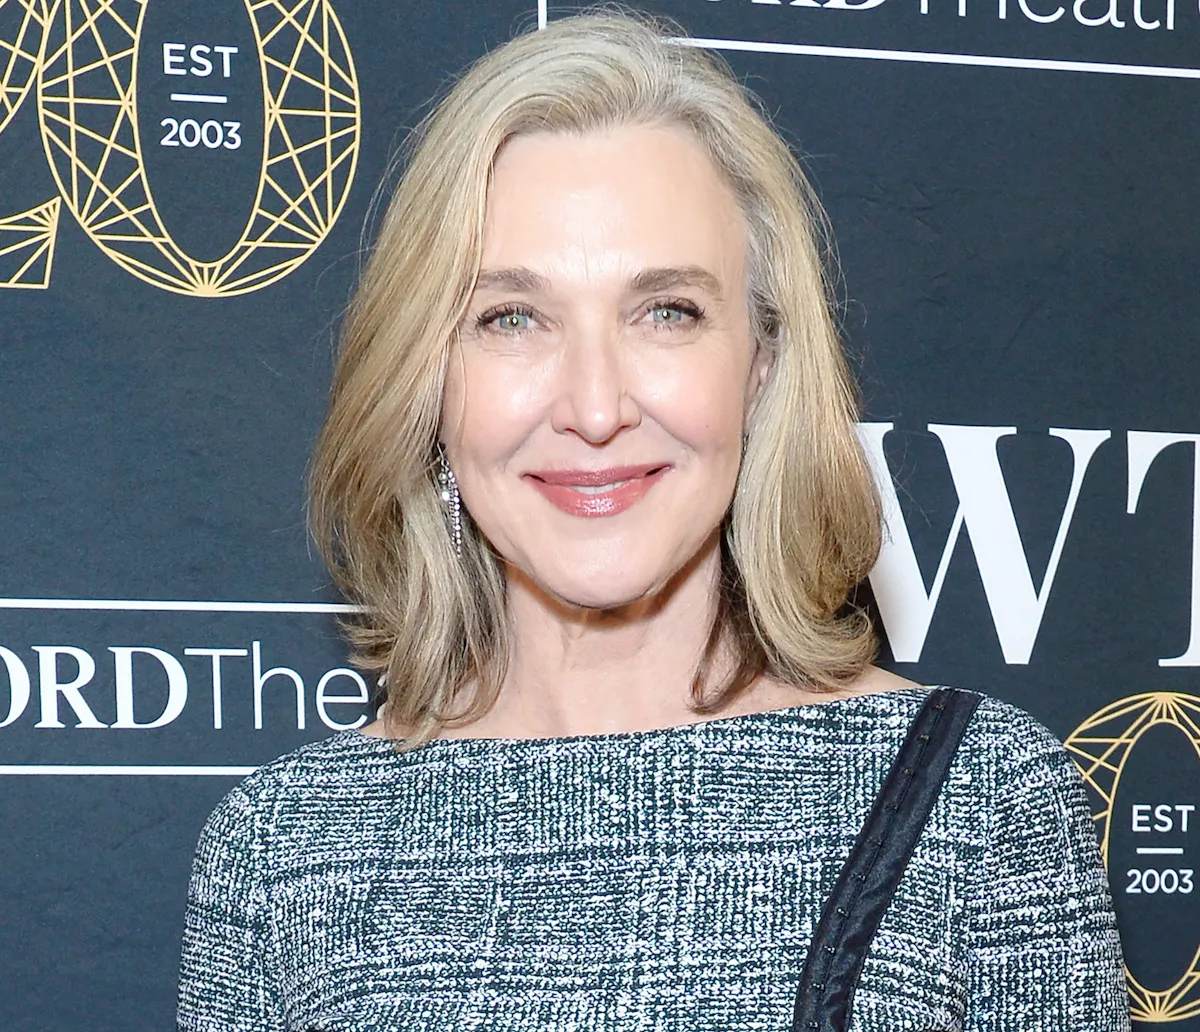 Seinfeld Star Brenda Strong Shares ‘Ride or Die’ Swimsuit Photo